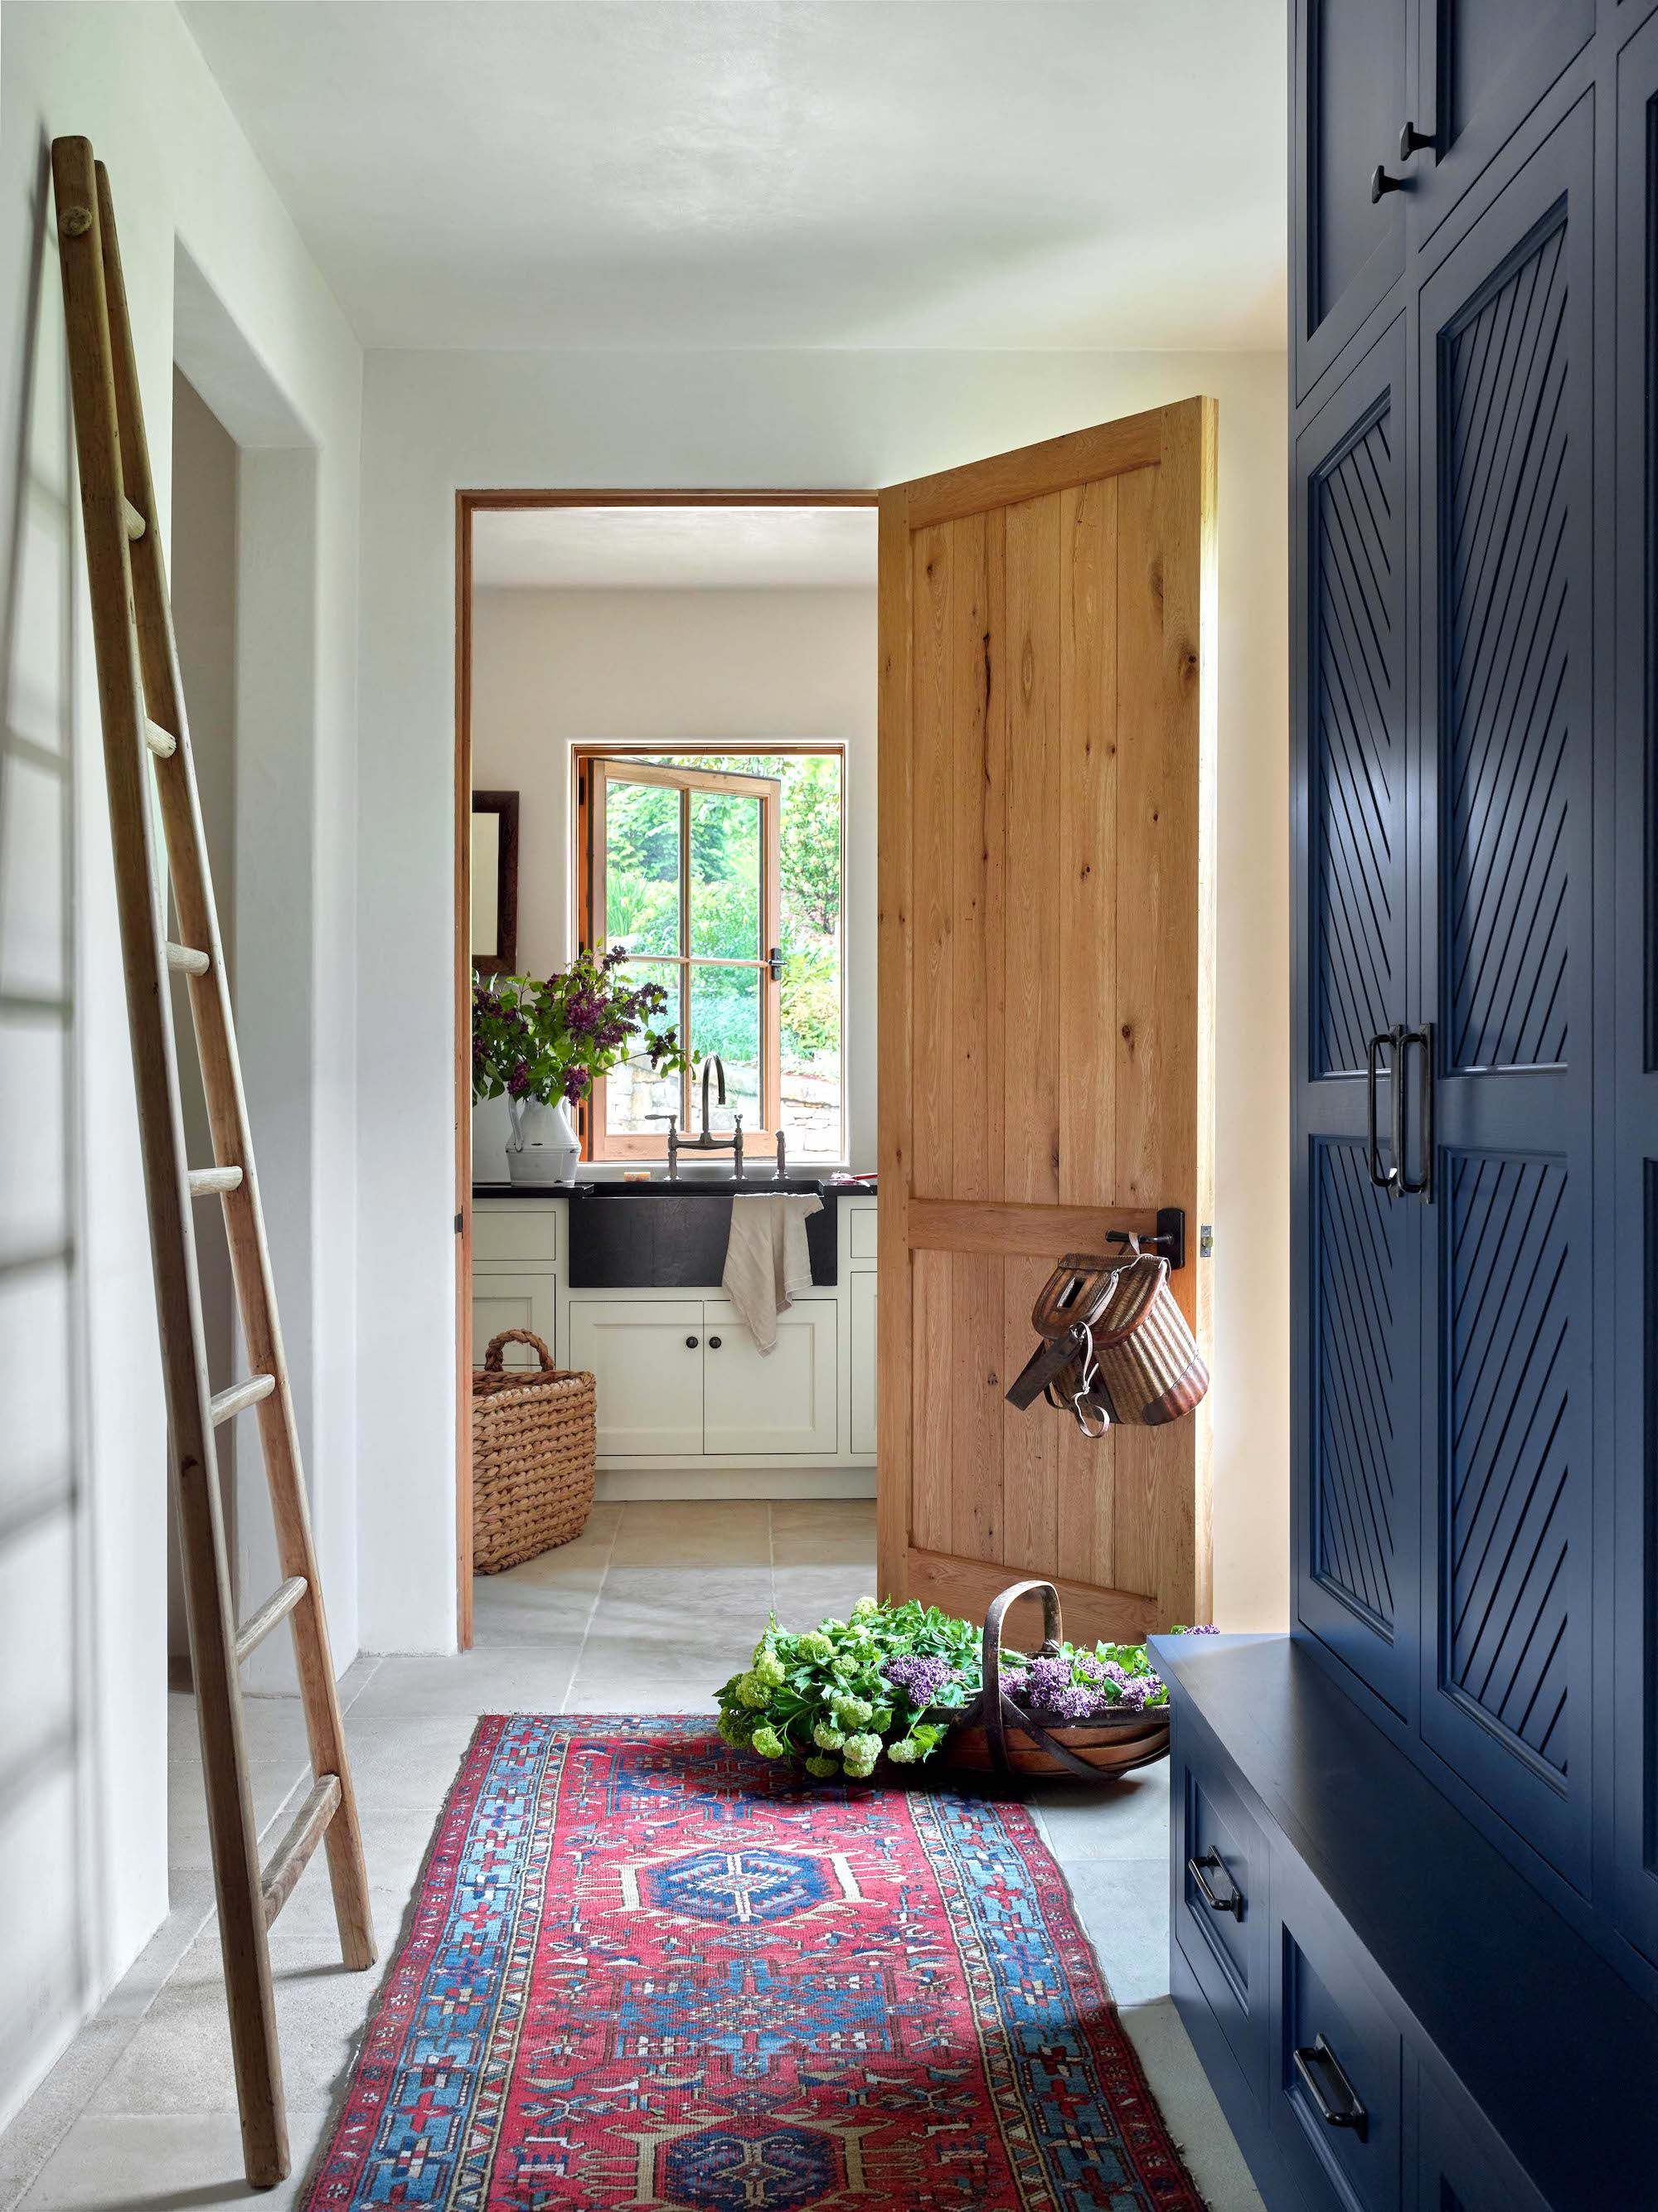 8 More Helpful Small Space Solutions From Interior Designers